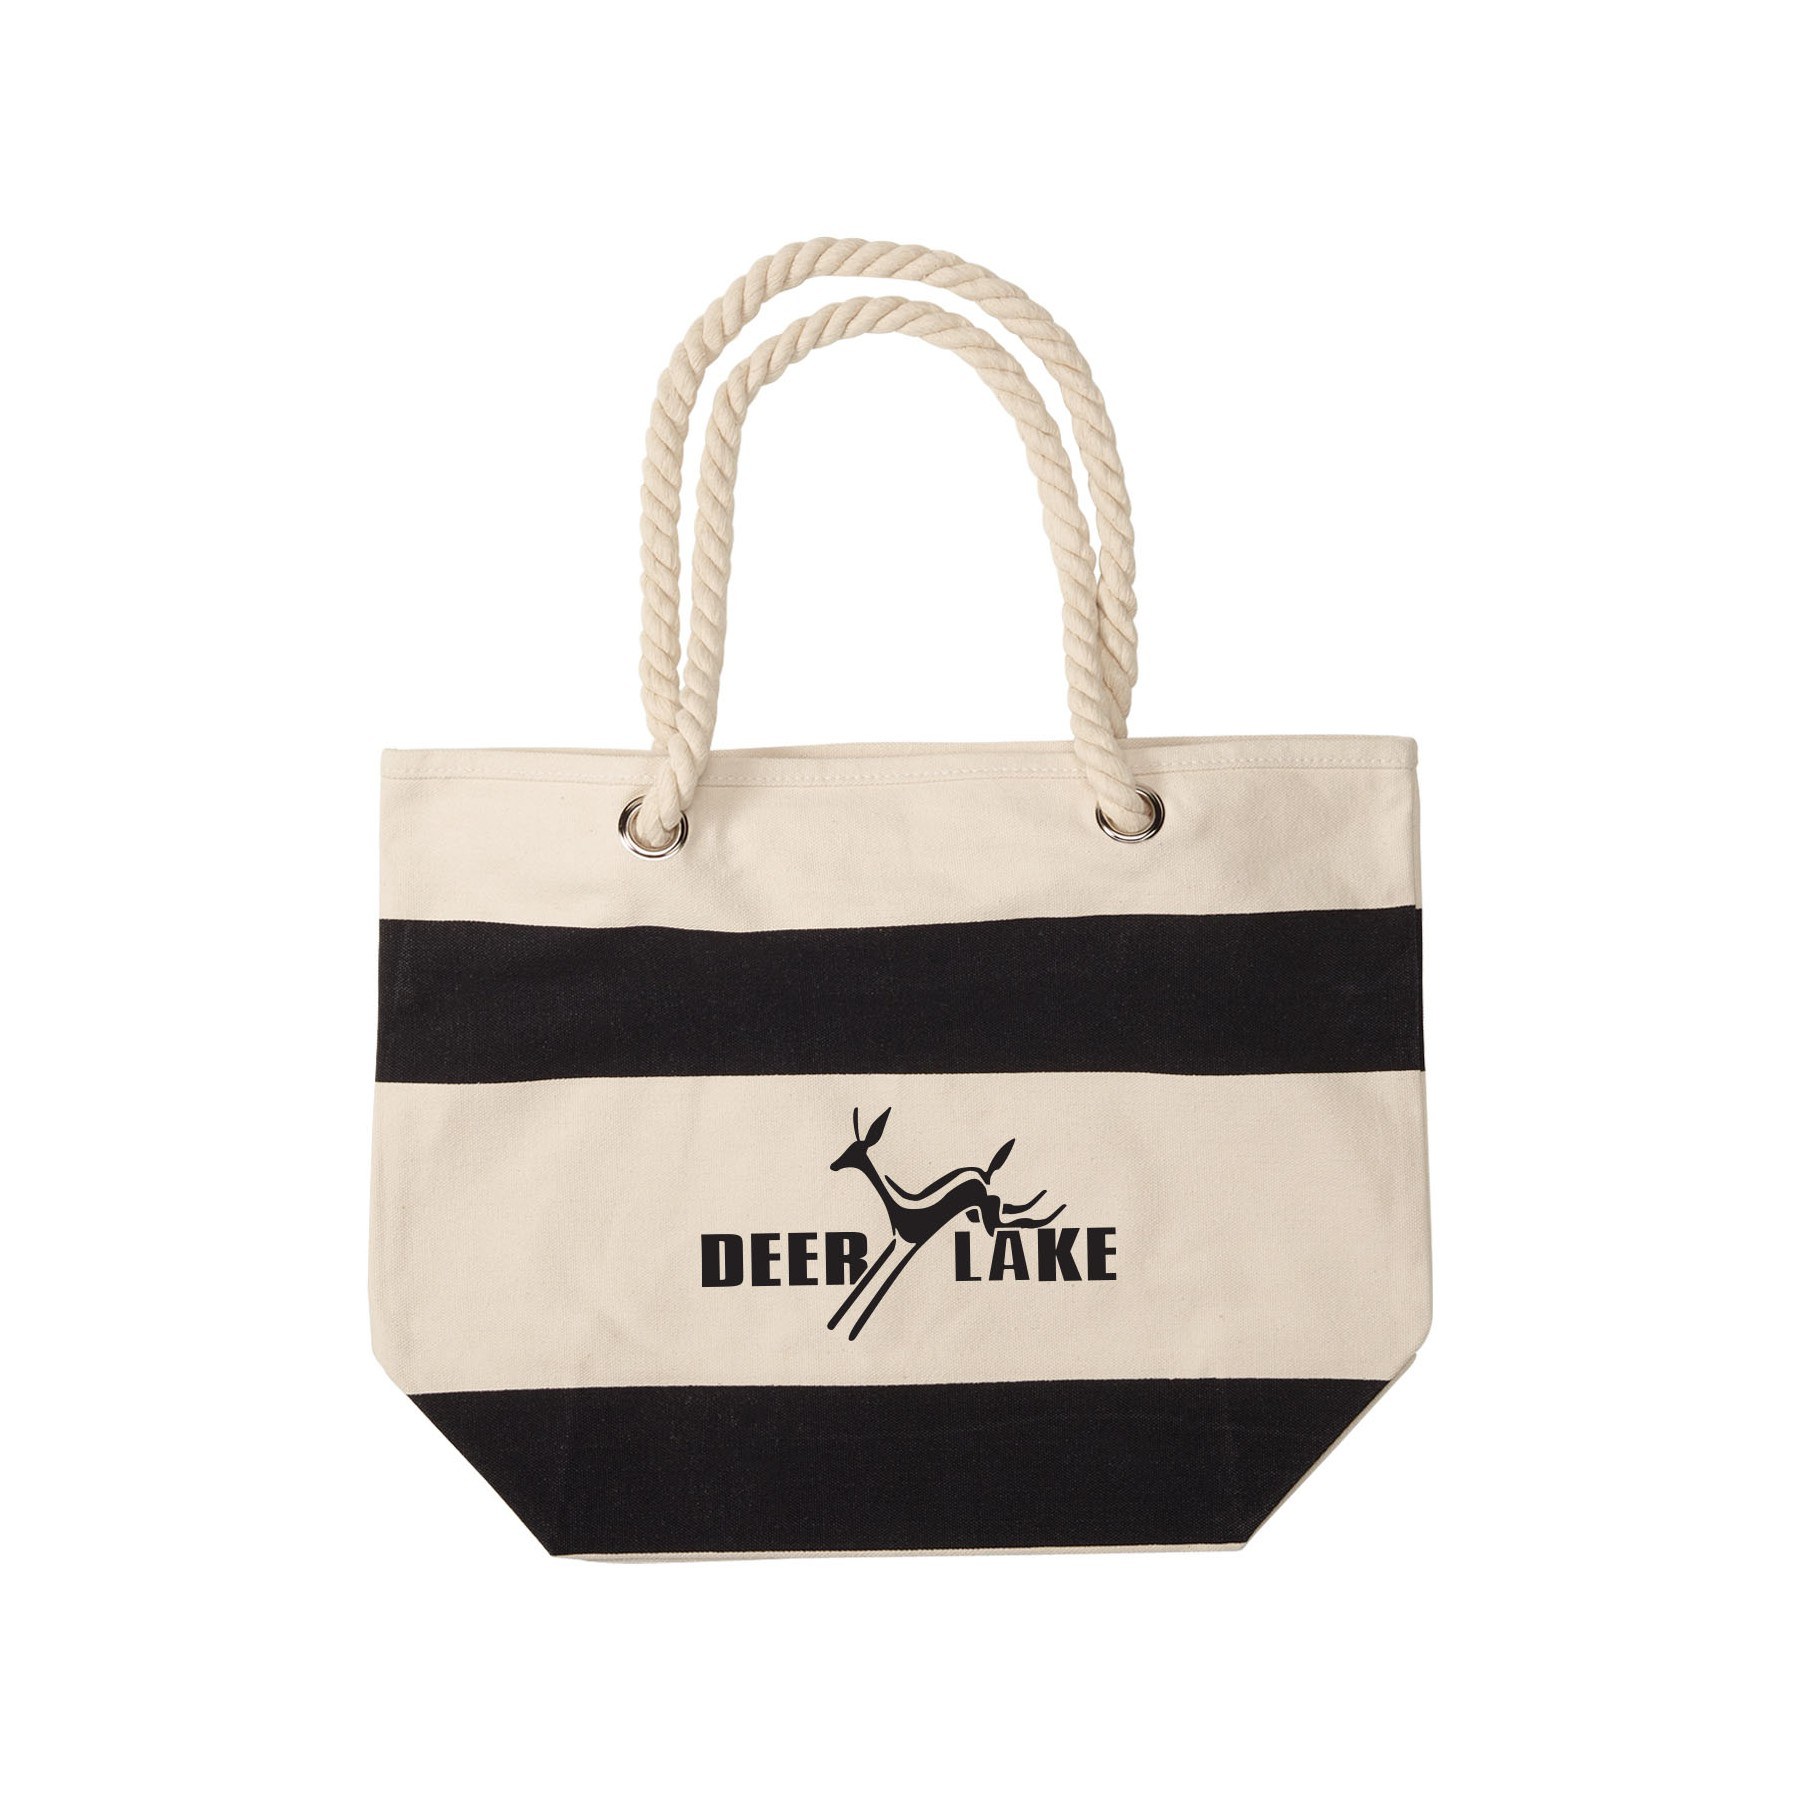 Designer Cotton Canvas Beach Tote with Cotton Rope Handle